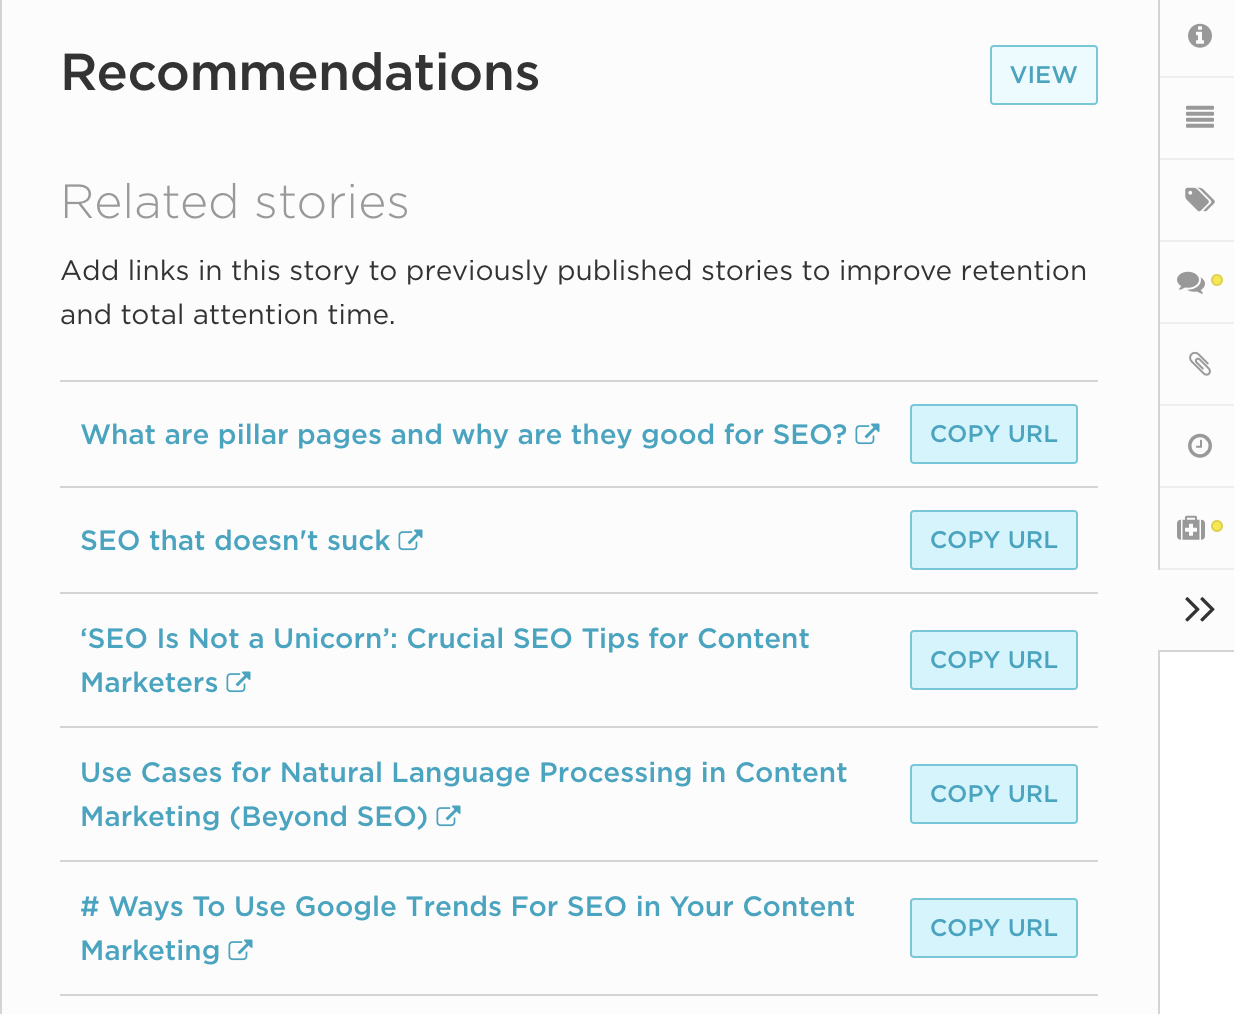 The Recommendations tab identifies additional opportunities for cross-links in the content.